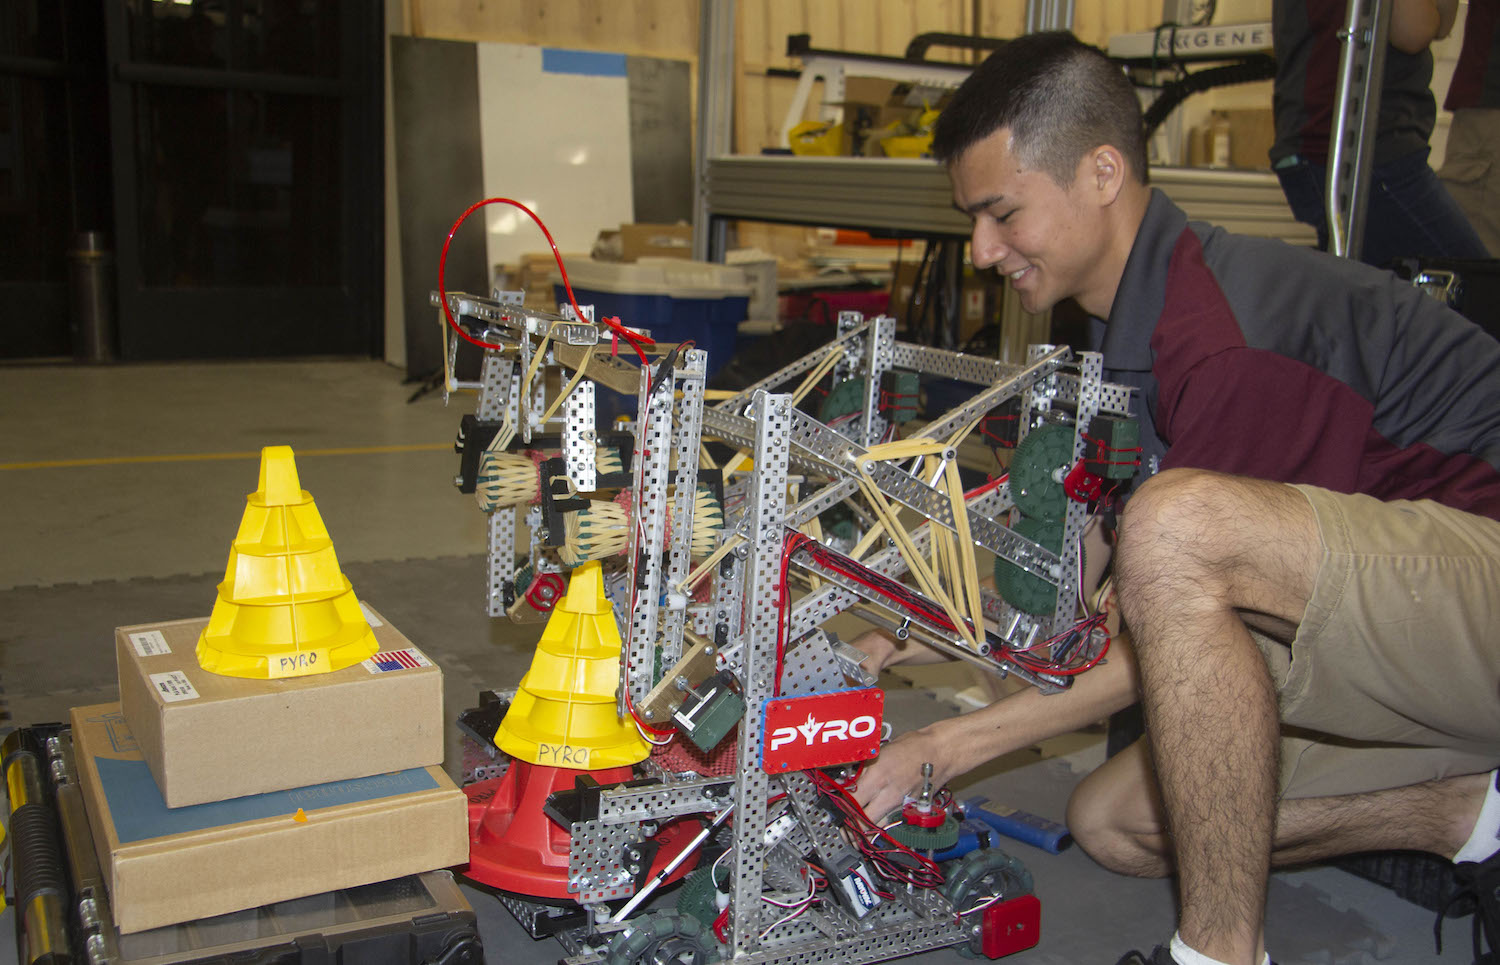 Photo of student working on a robot. Caption: Ryan Bodhipaksha, a robotics engineering major at Arizona State University and co-lead of PYRO Robotics, practices with the team’s robot to prepare for the VEX Robotics World Championship 2018. Photo courtesy of Samantha Blokker